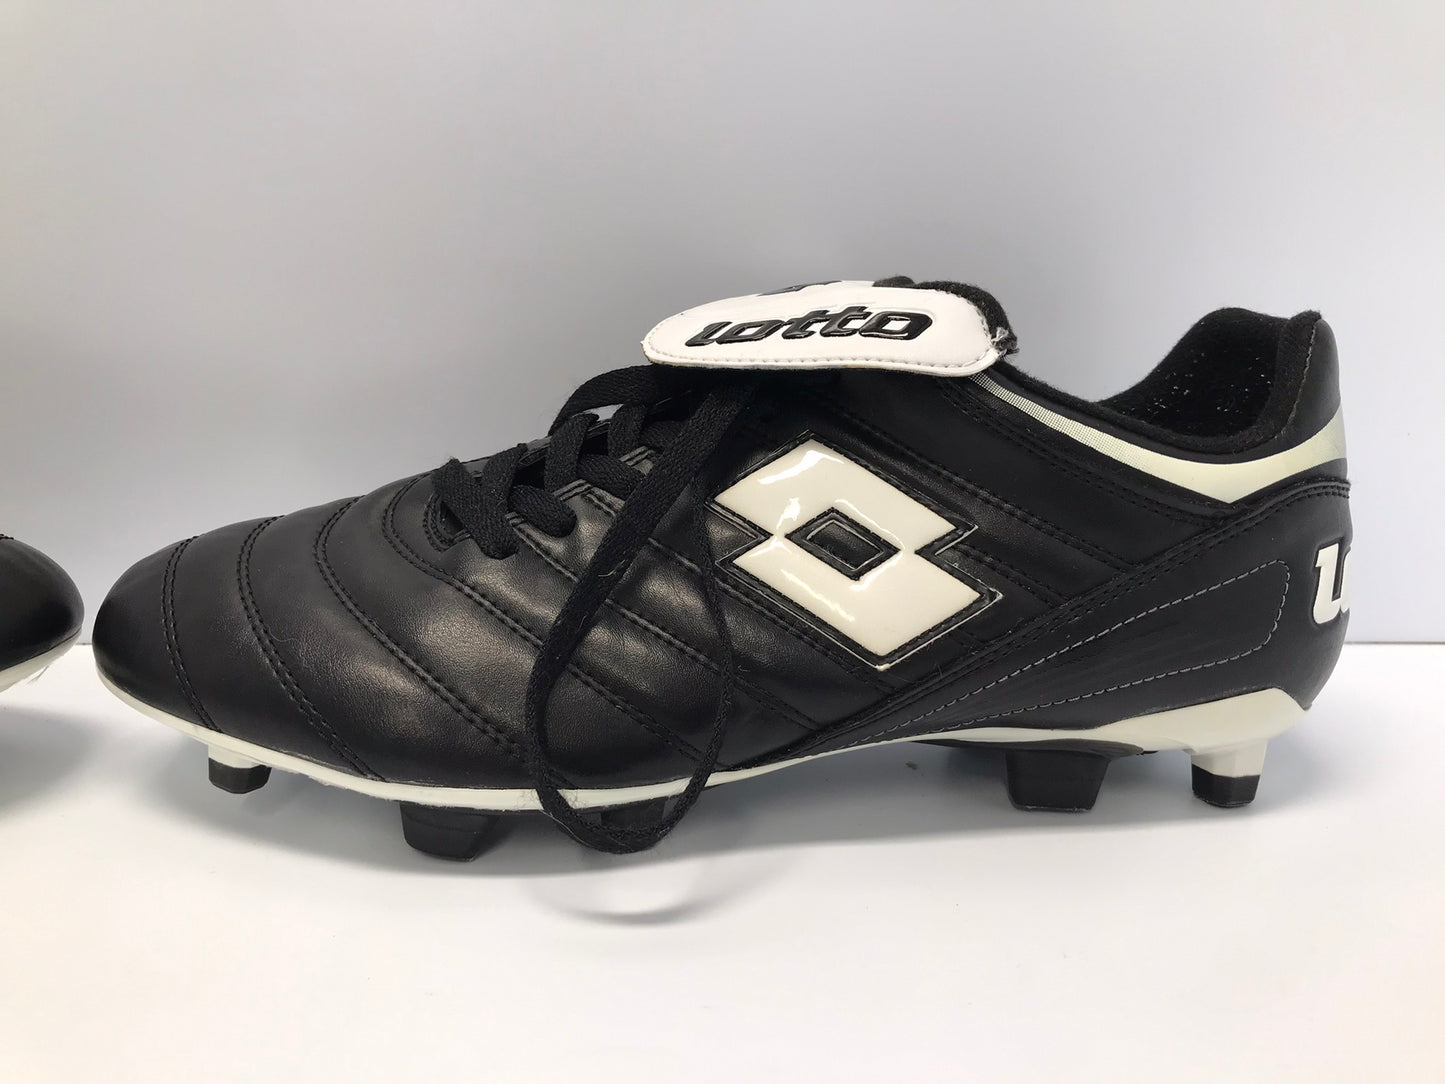 Soccer Shoes Cleats Men's Size 10.5 Lotto Black White Excellent As New